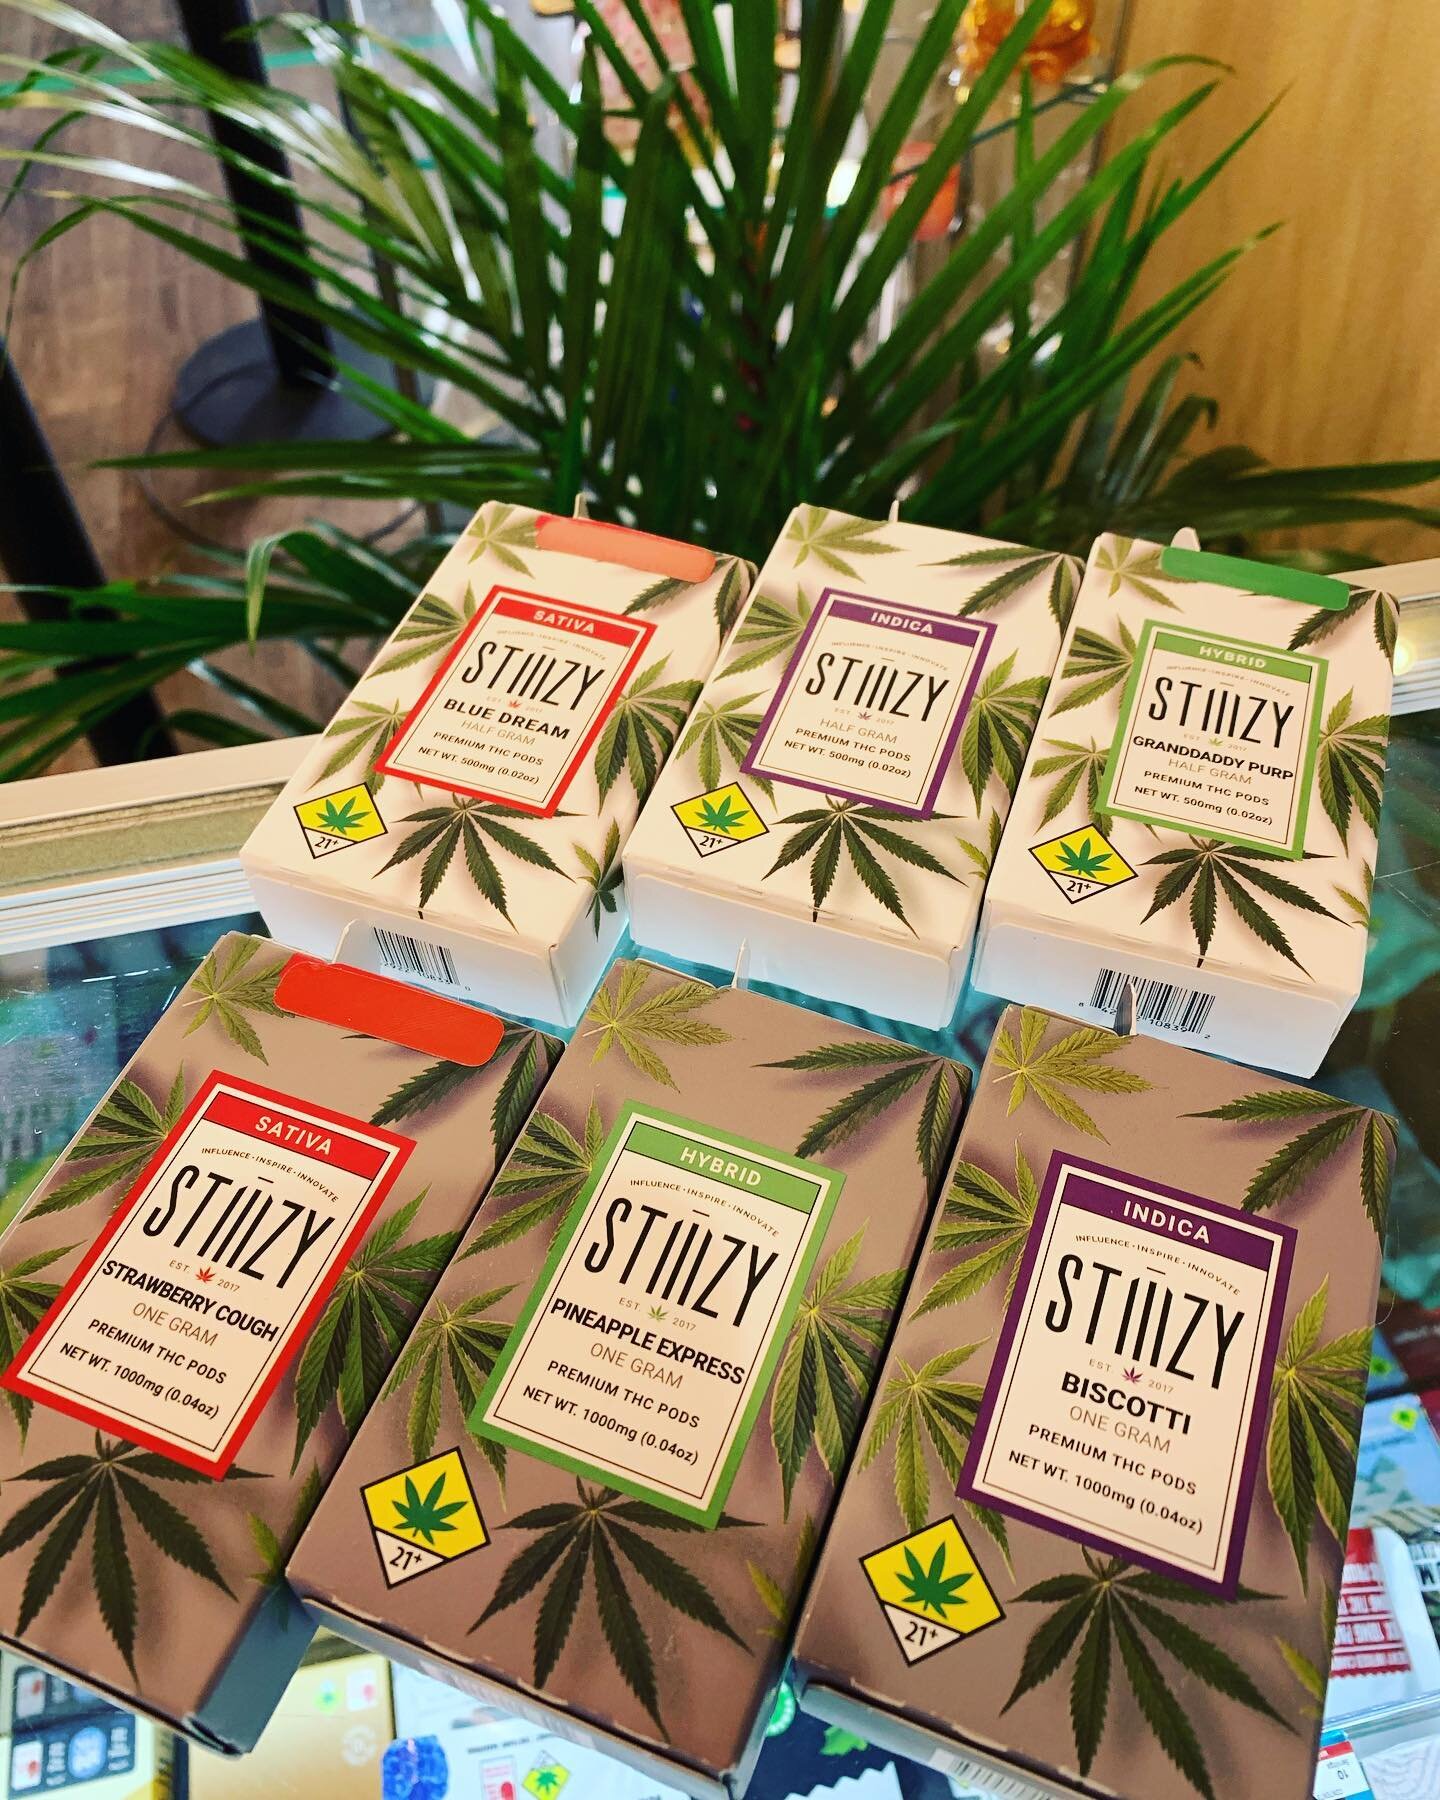 Stiiizy is back in full force bringing you some stoney, terp slapppin pods AND new high power batteries 🥰🔥💕
&bull;
&bull;
&bull;
#stiiizynation #stiiizypods #letsgethigh #stonedaf #premiumvape #comesayhigh

❌WARNING: This product has intoxicating 